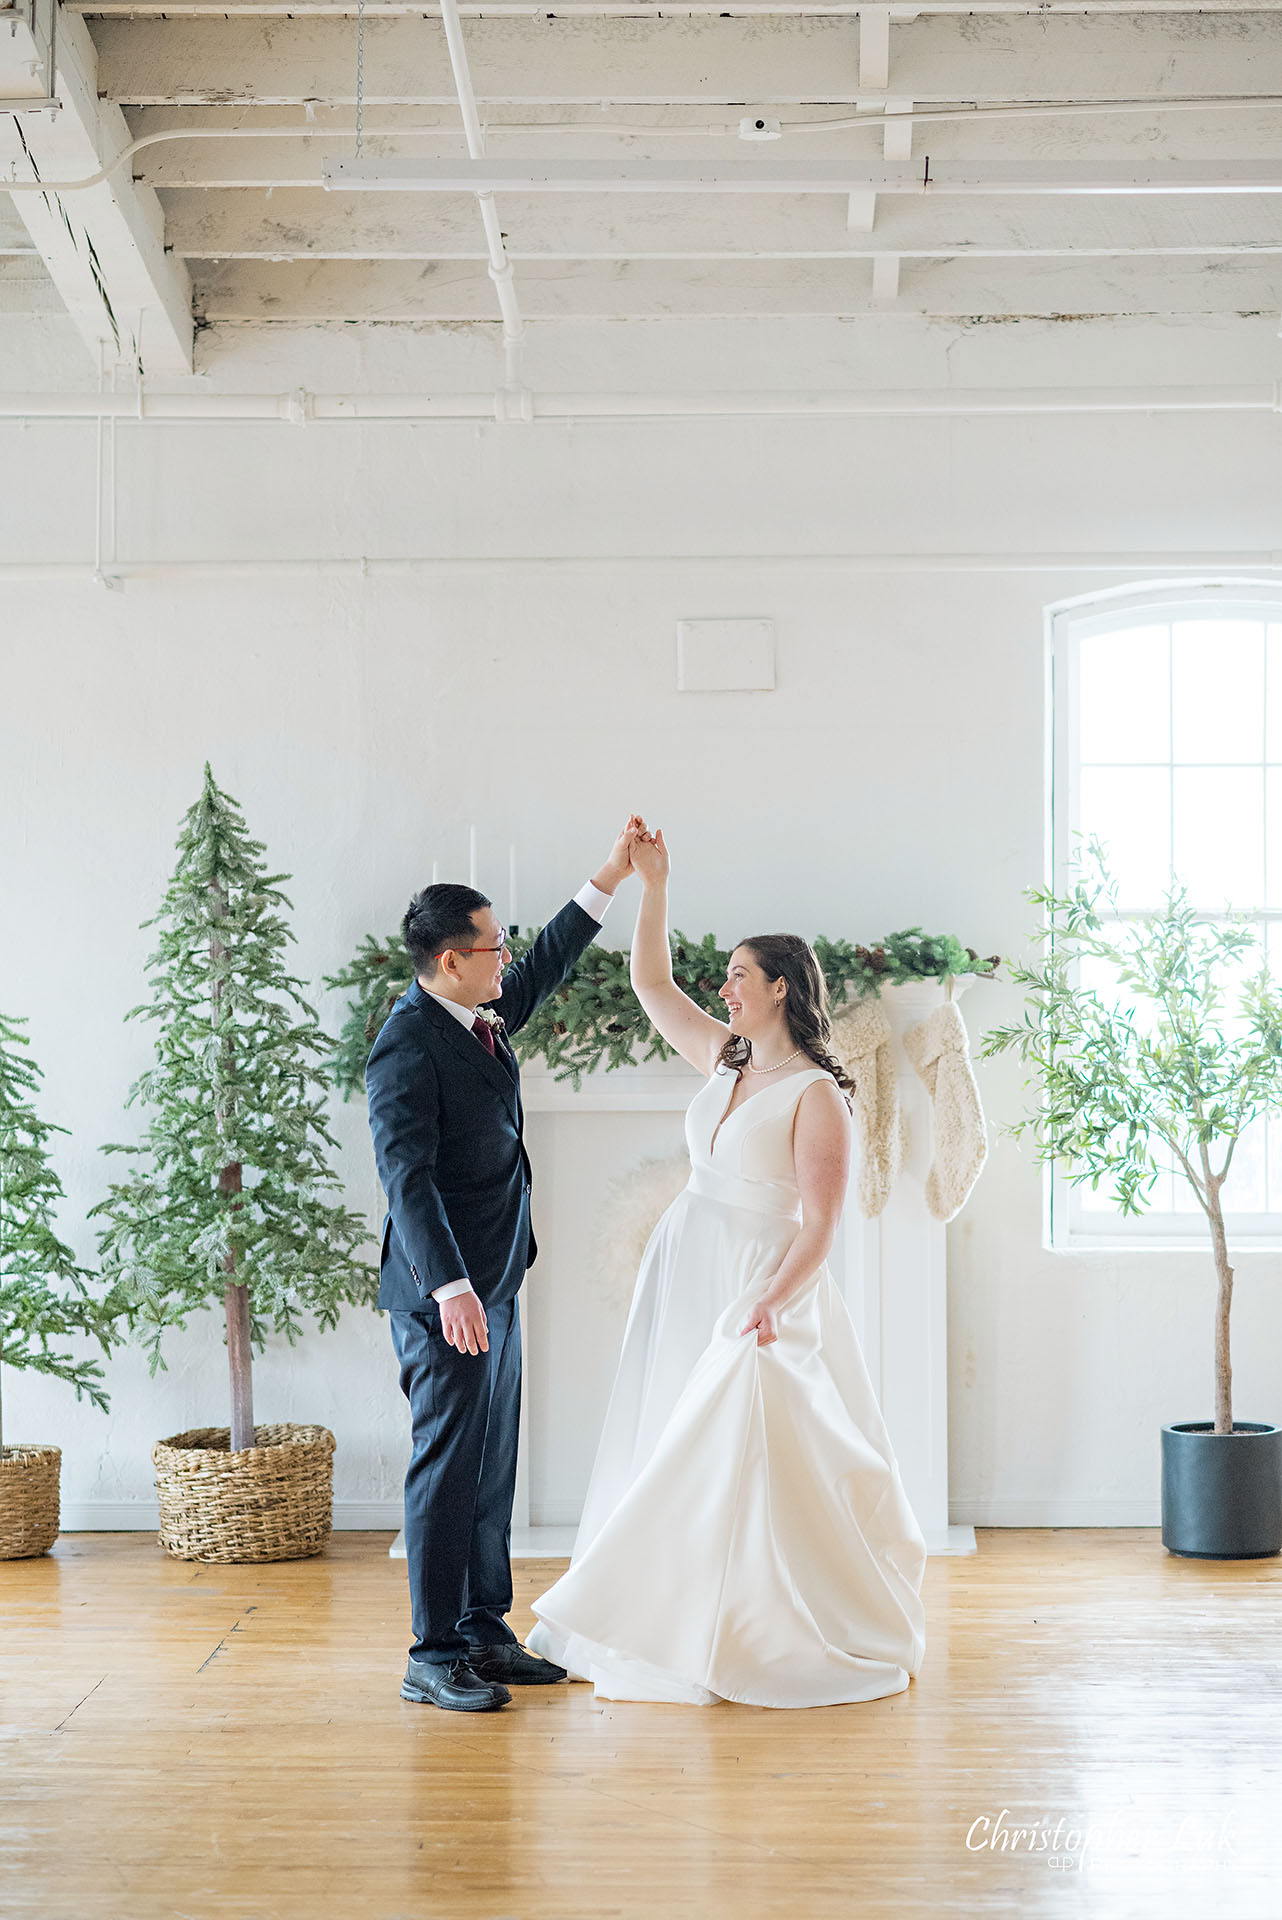 Bride Groom Vintage White Loft Studio Kitchener Waterloo Winter Christmas Natural Candid Photojournalistic Happy Smile Hug Hold Each Other Portrait Bridal Gown Dress Train Dancing Twirl Spin